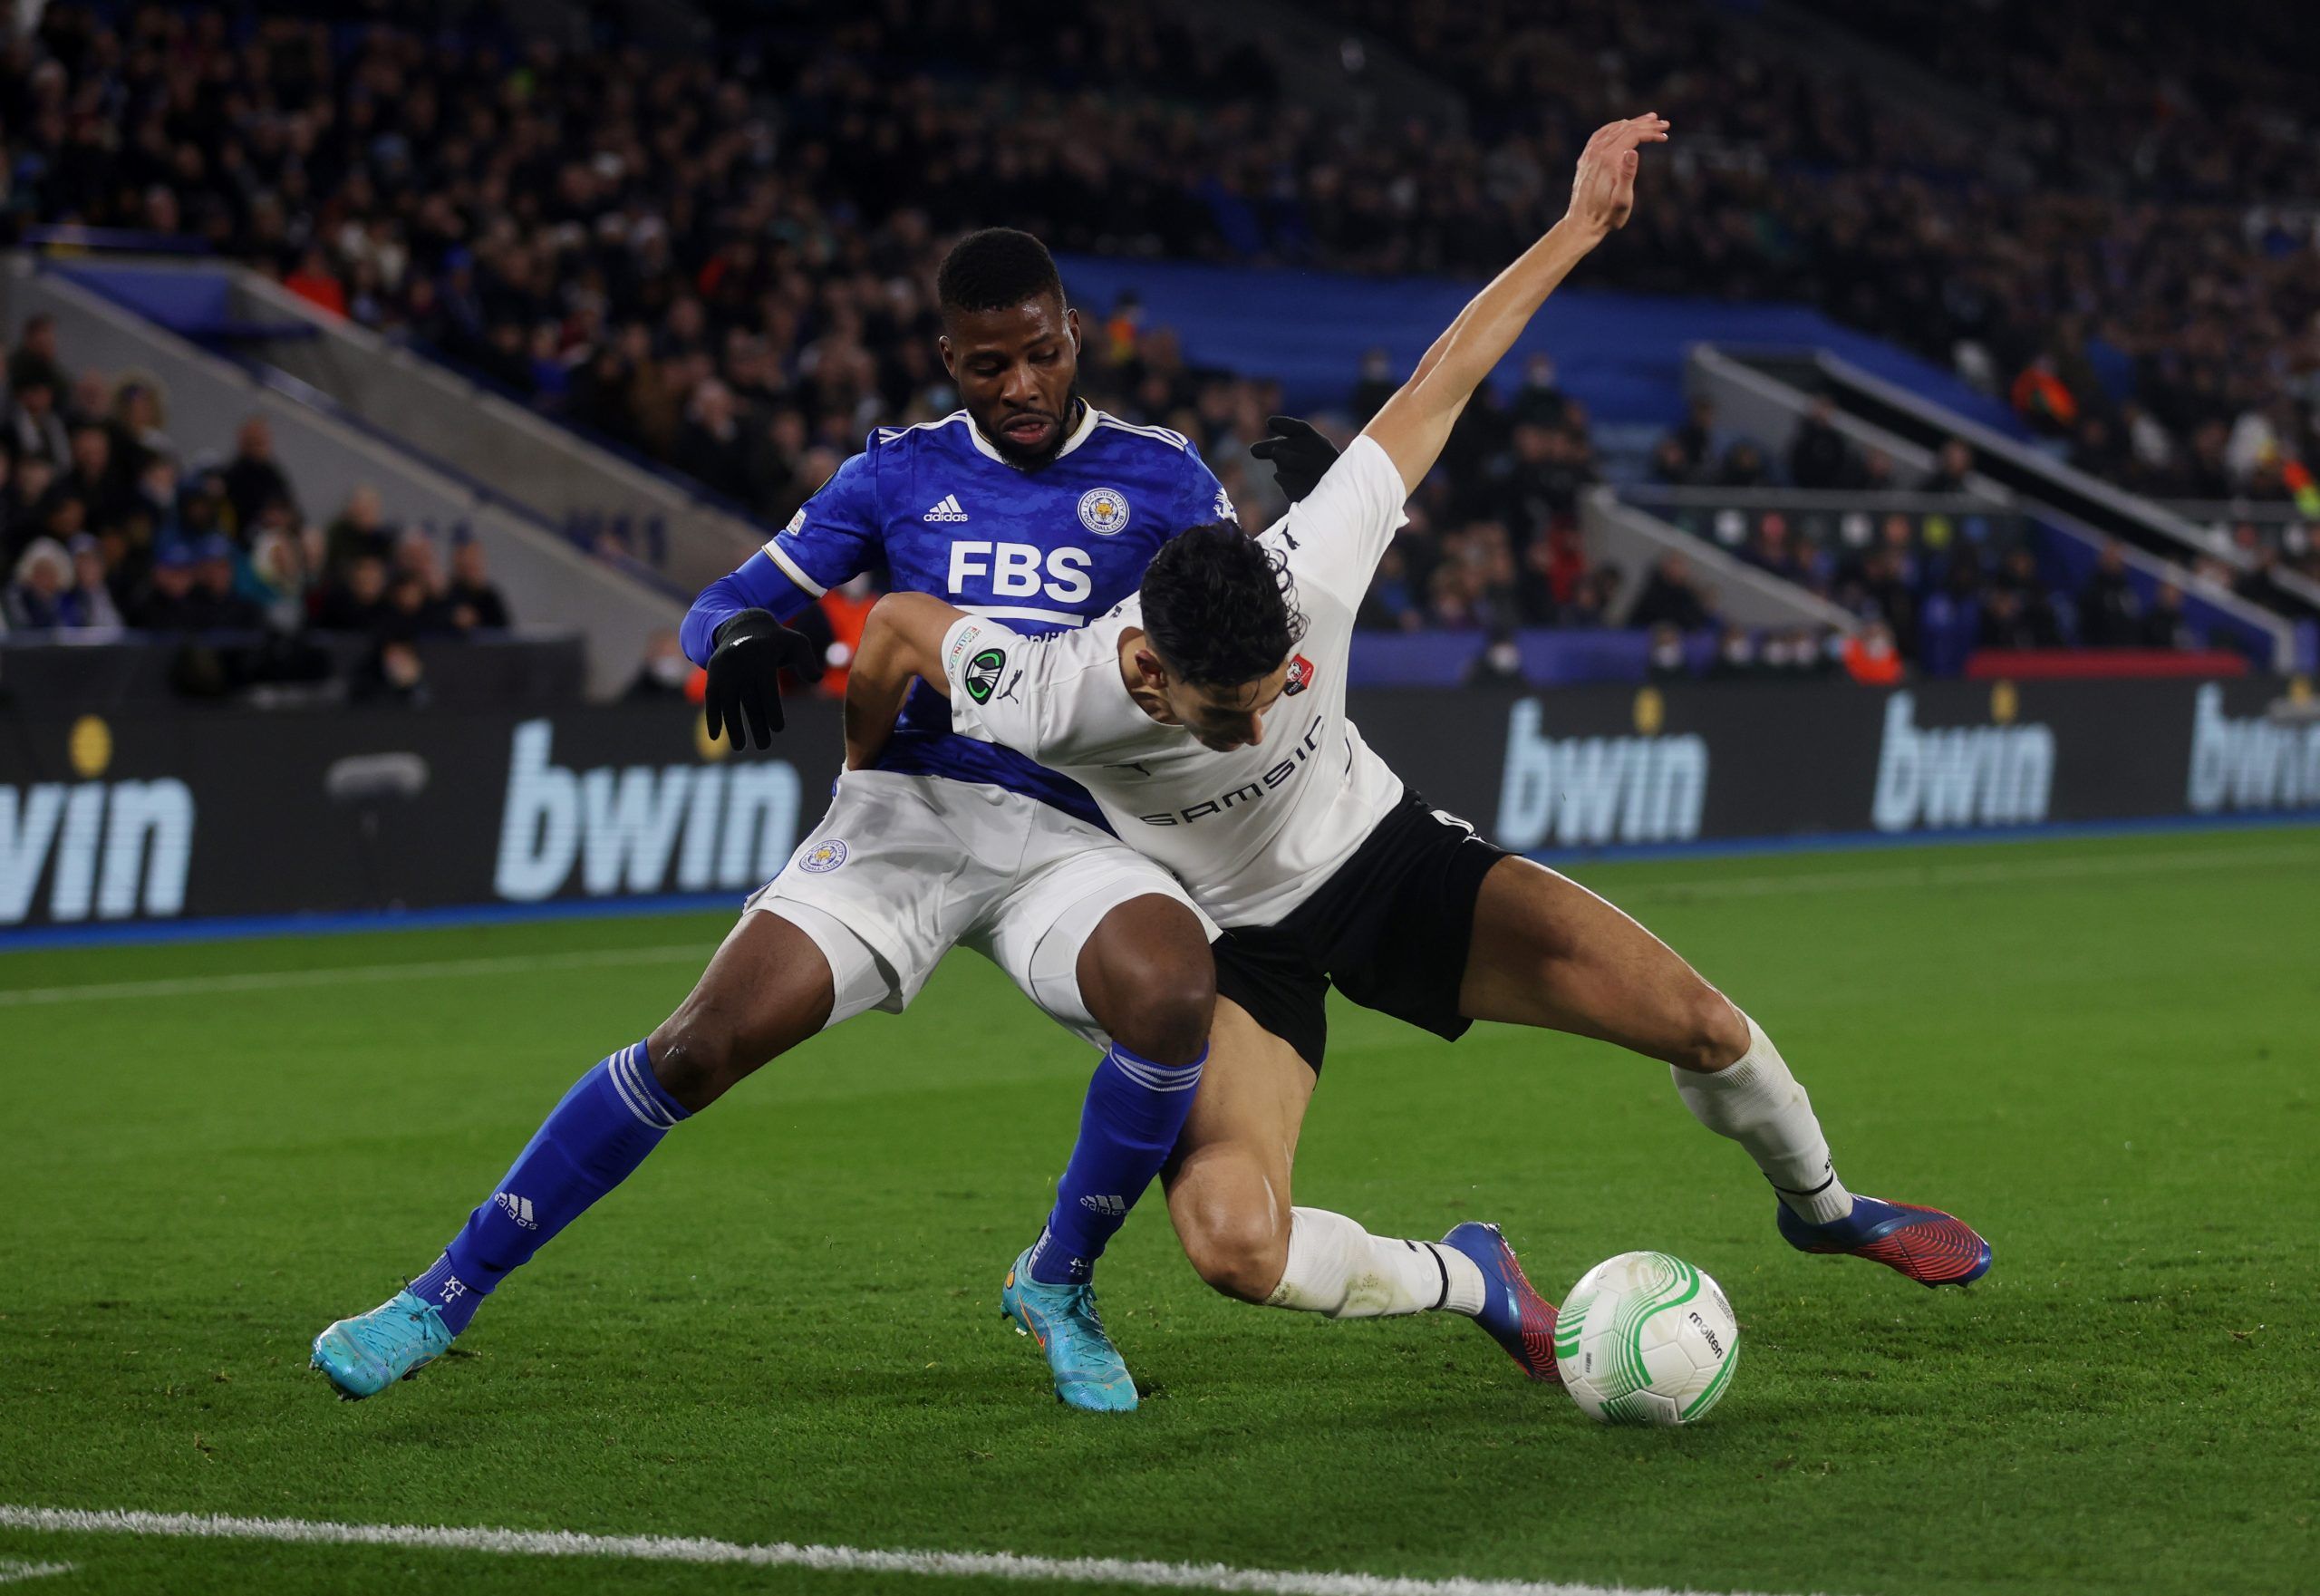 Soccer Football - Europa Conference League - Round of 16 First Leg - Leicester City v Stade Rennes - King Power Stadium, Leicester, Britain - March 10, 2022 Stade Rennes' Nayef Aguerd in action with Leicester City's Kelechi Iheanacho Action Images via Reuters/Matthew Childs